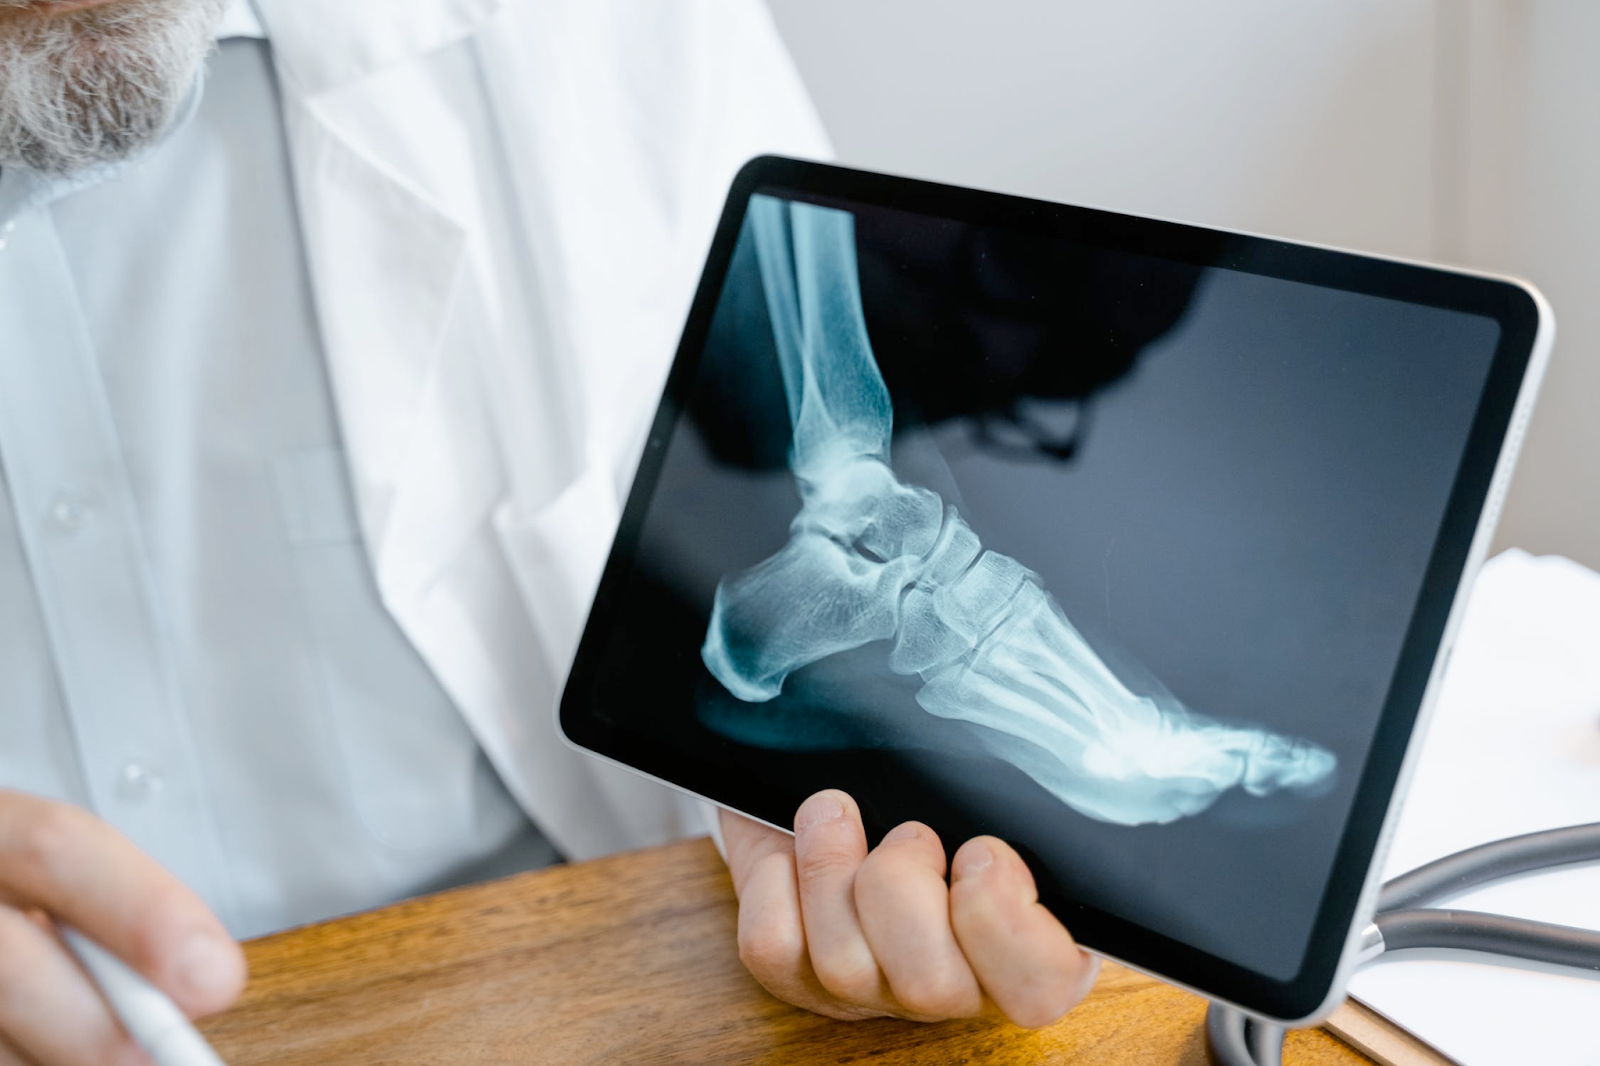 A doctor showing the anatomy of the bones in a foot through an iPad